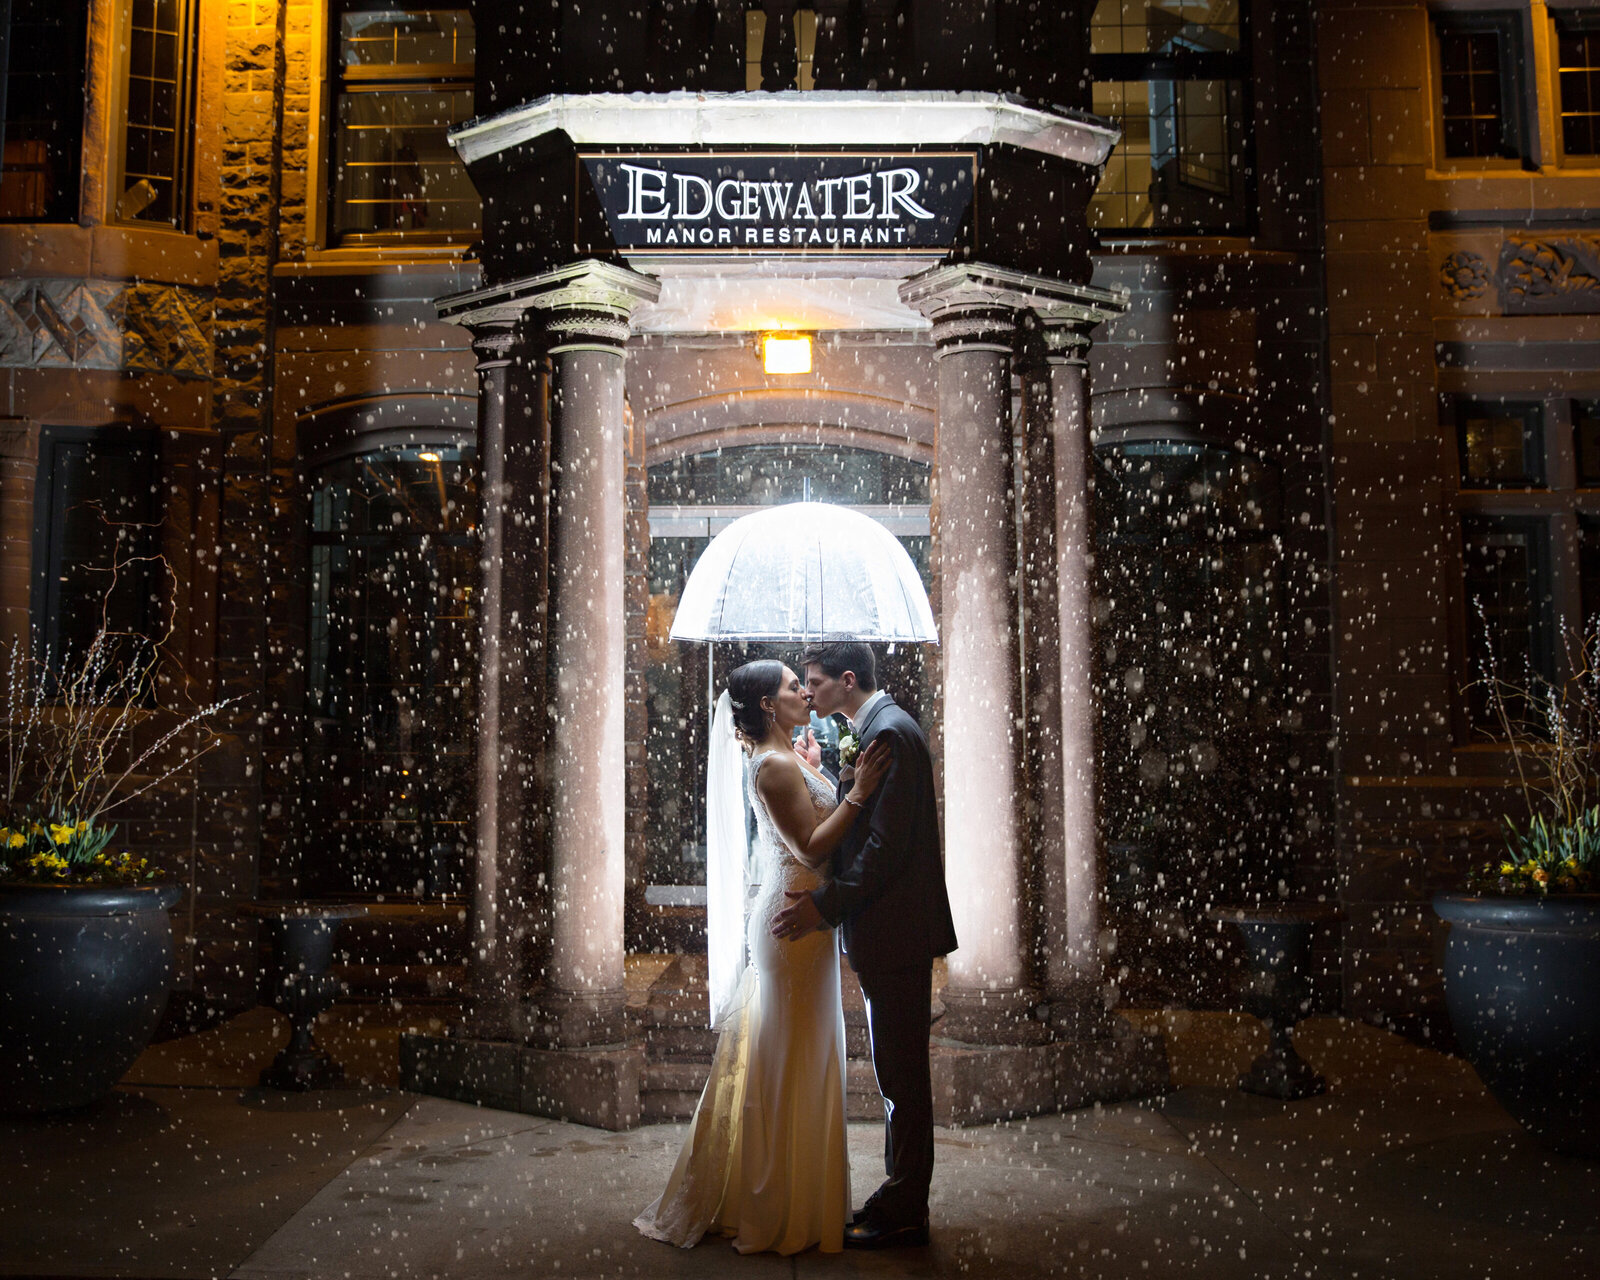 wedding couple in the rain with umbrella at night at Edgewater Manor in Hamilton